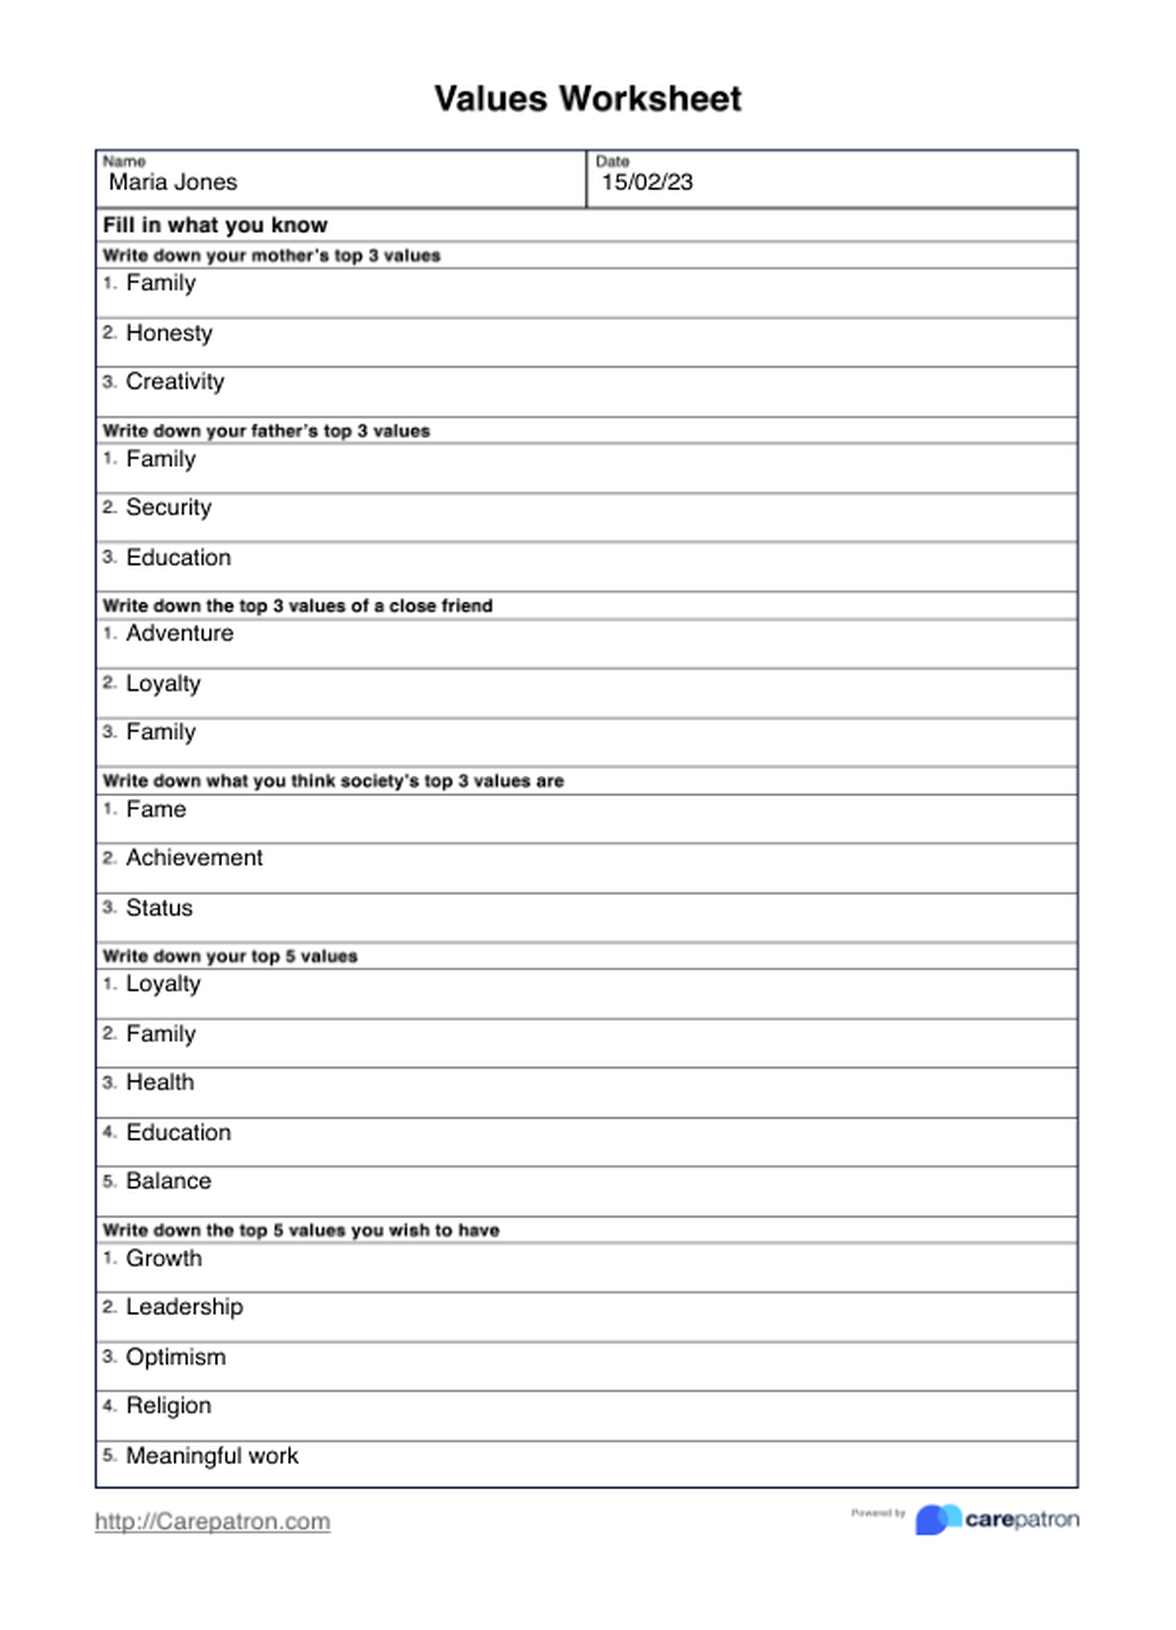 Values Worksheets PDF Example